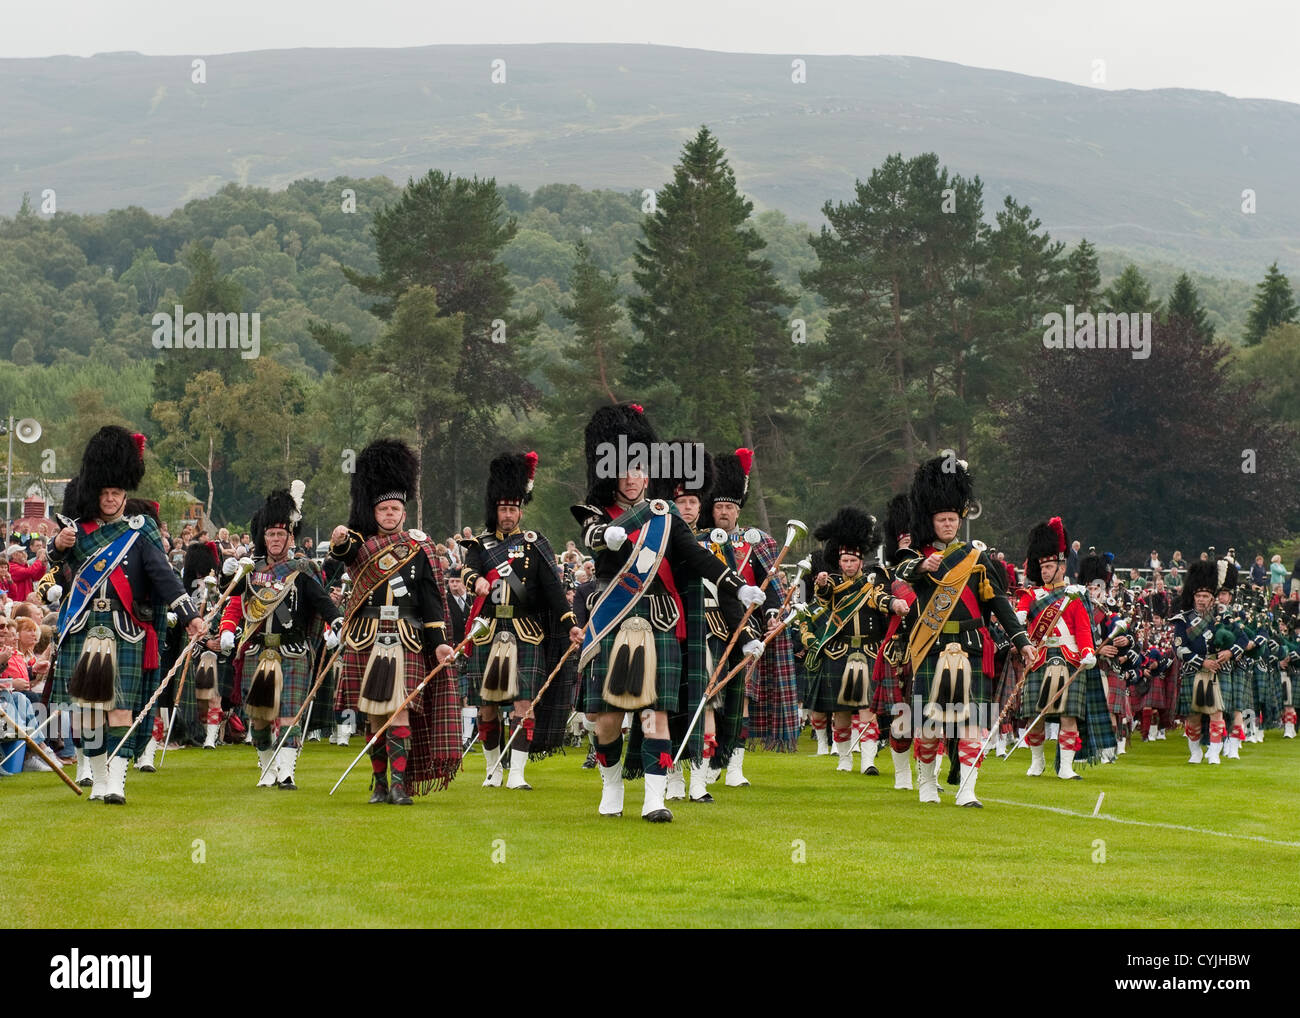 Scottish Massed Pipe Bands playing at the 'Braemar Gathering' (Highland Games), Scotland Stock Photo